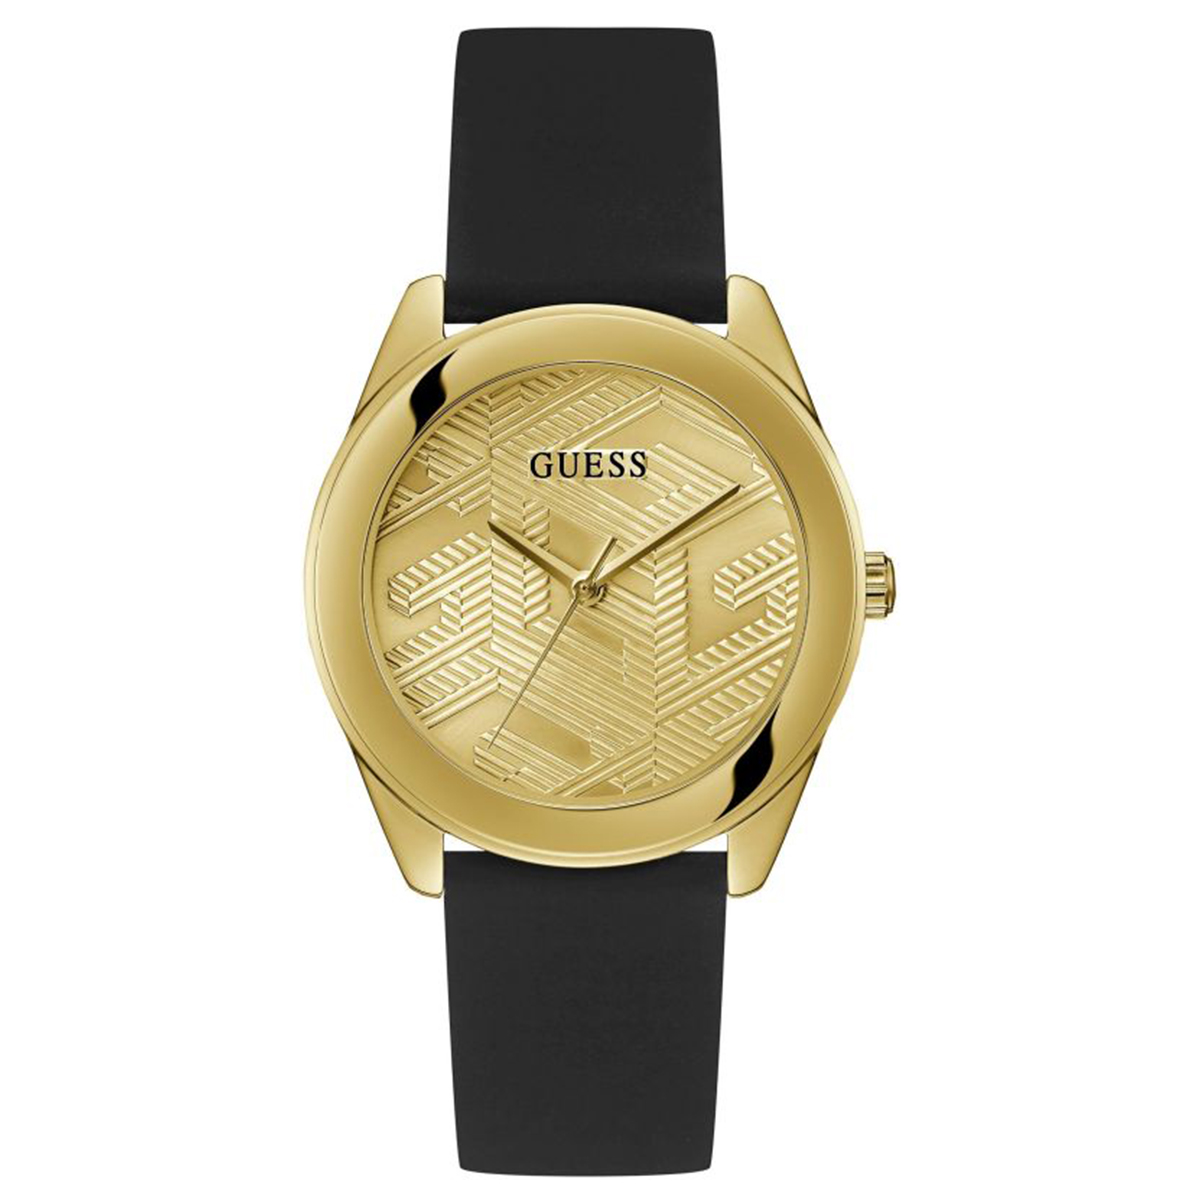 MONTRE GUESS FEMME SIMPLE SILICONE